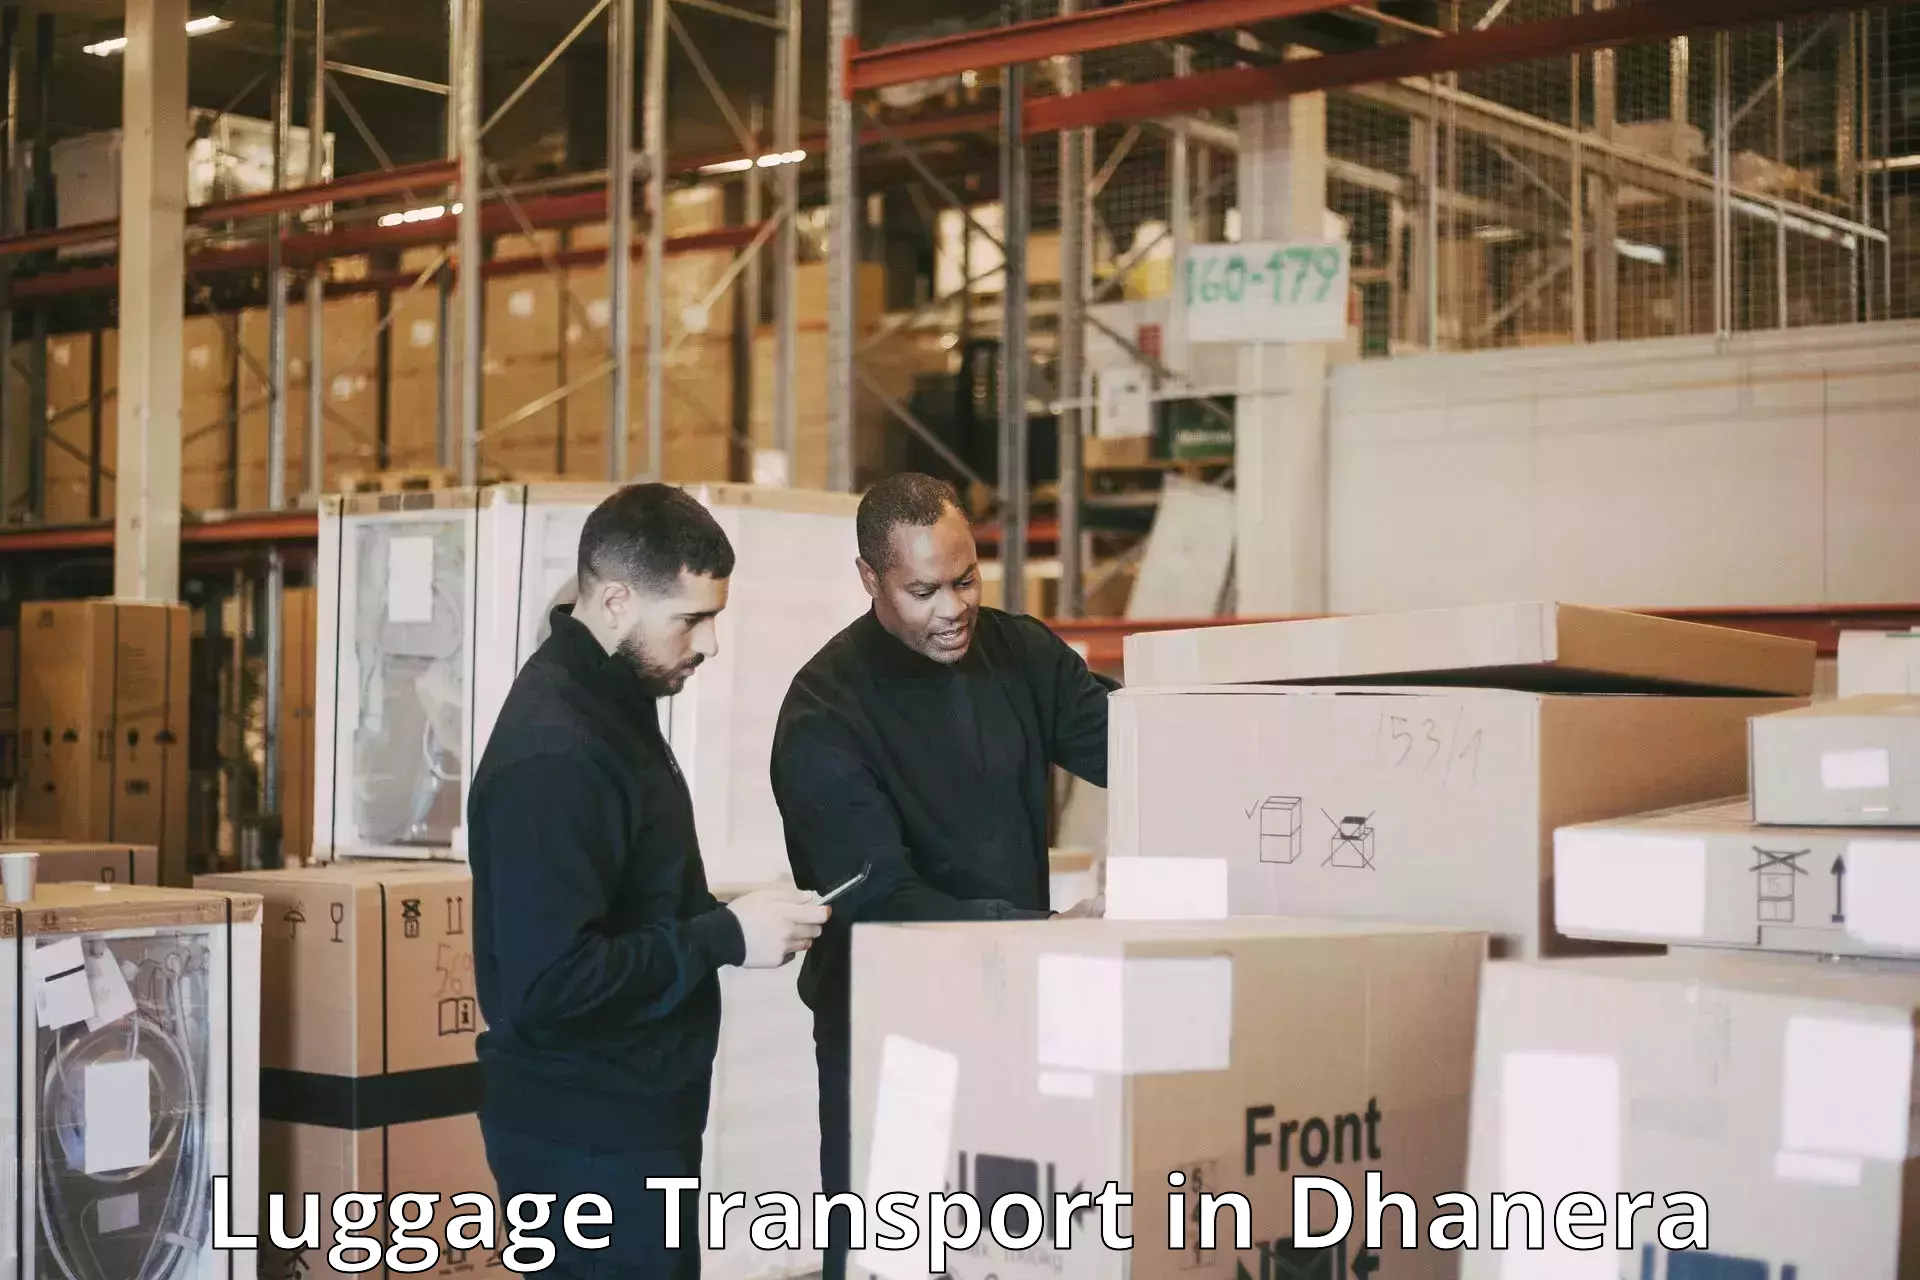 Baggage transport quote in Dhanera